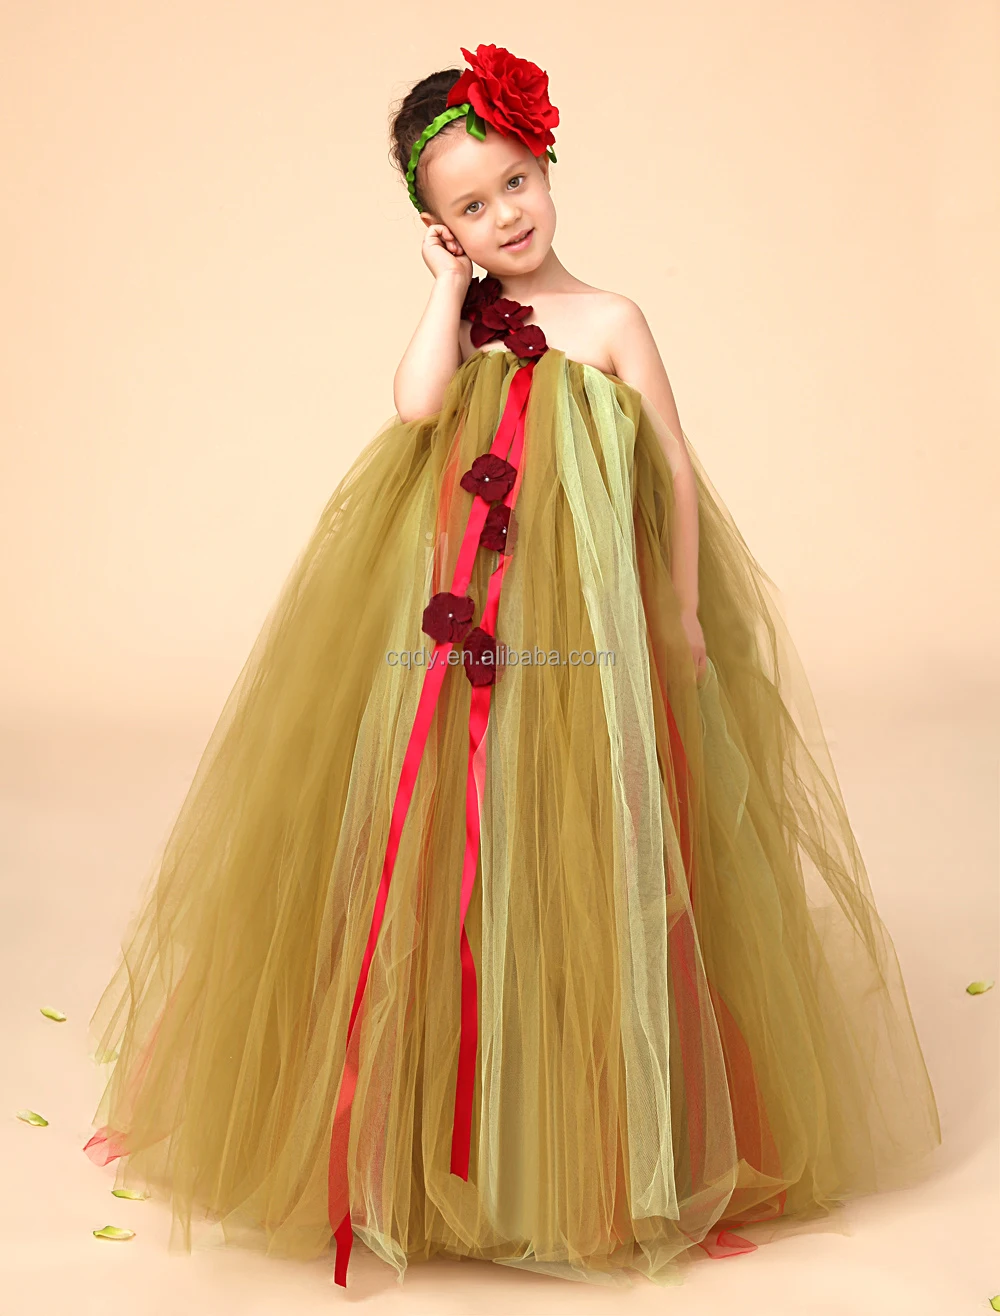 gown for 8 years old girl